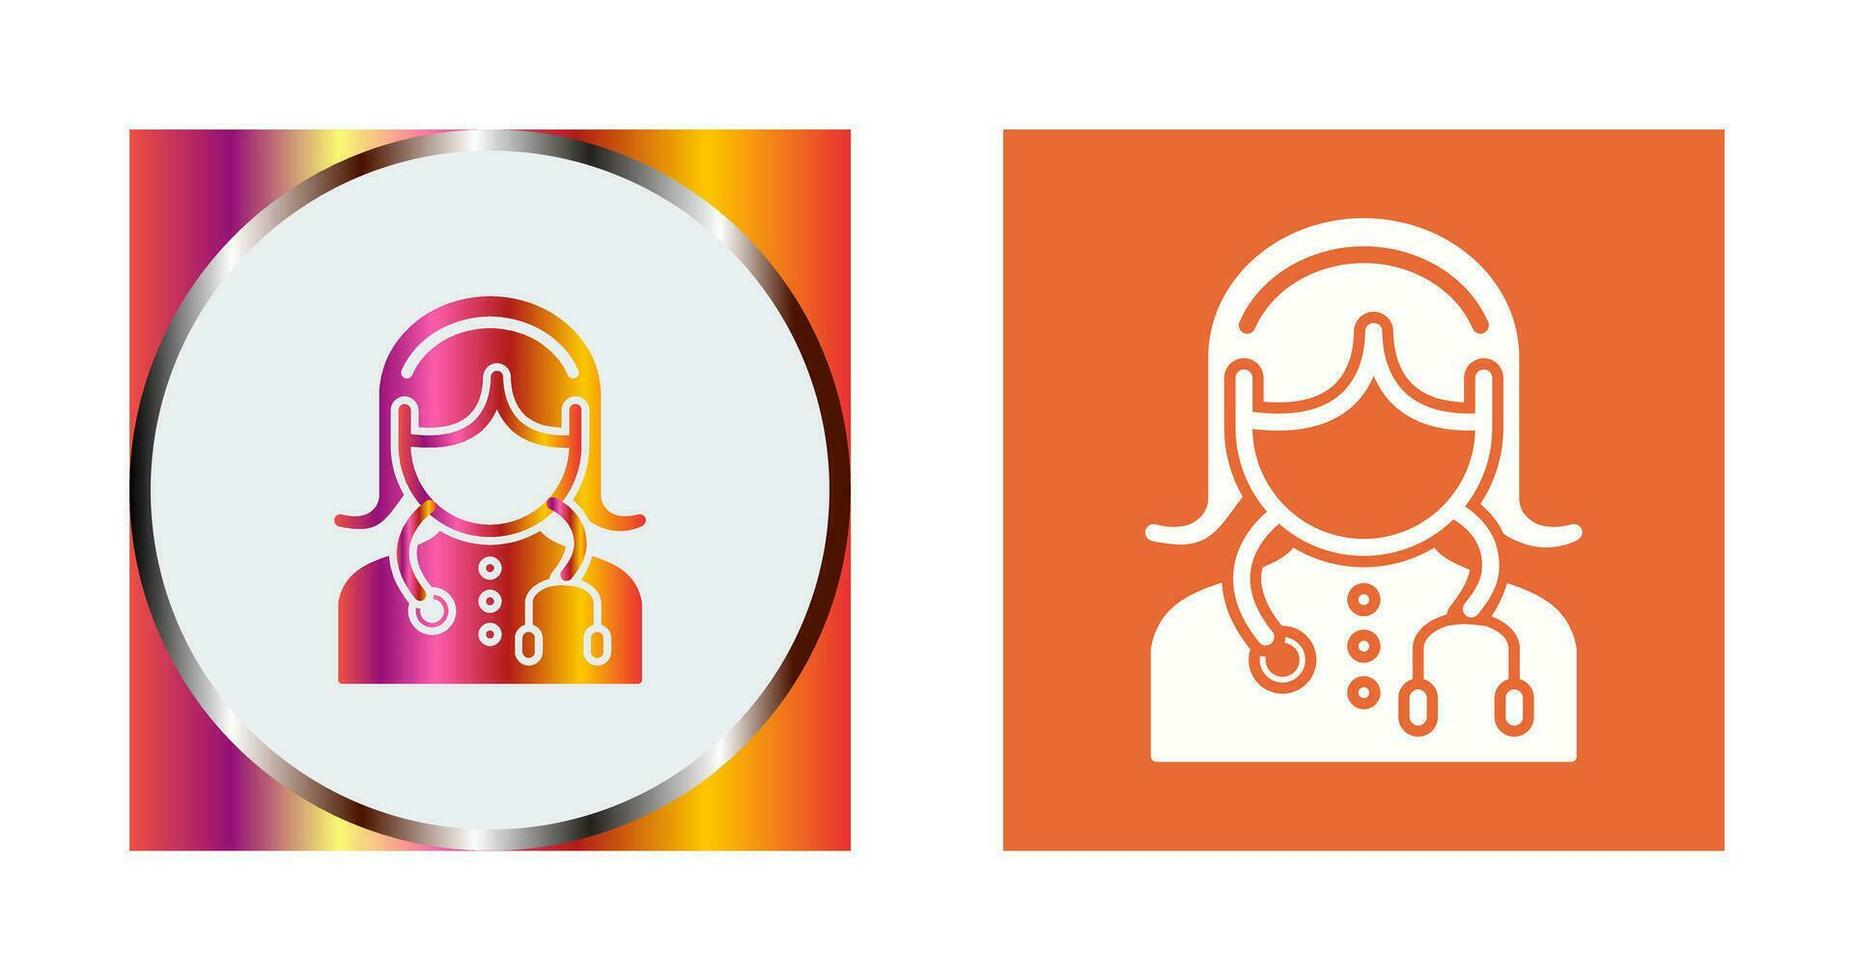 Medical Support Vector Icon